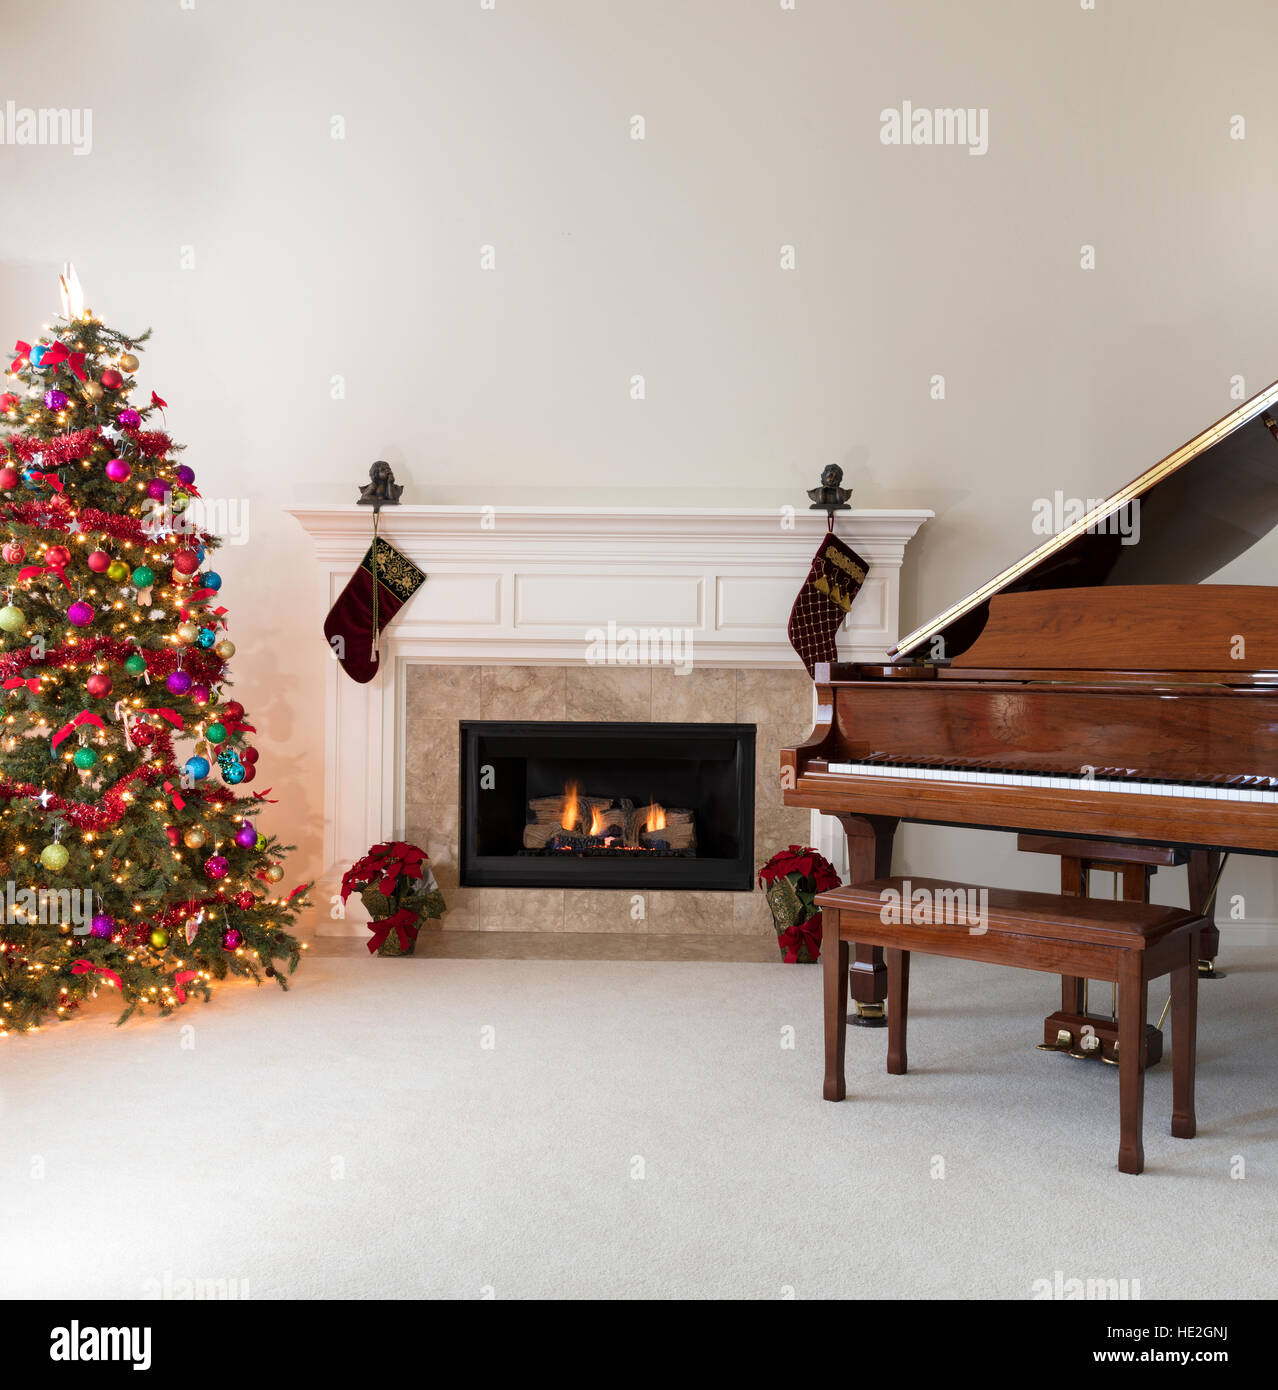 Living room with glowing fireplace, grand piano and decorated Christmas tree for the holidays Stock Photo